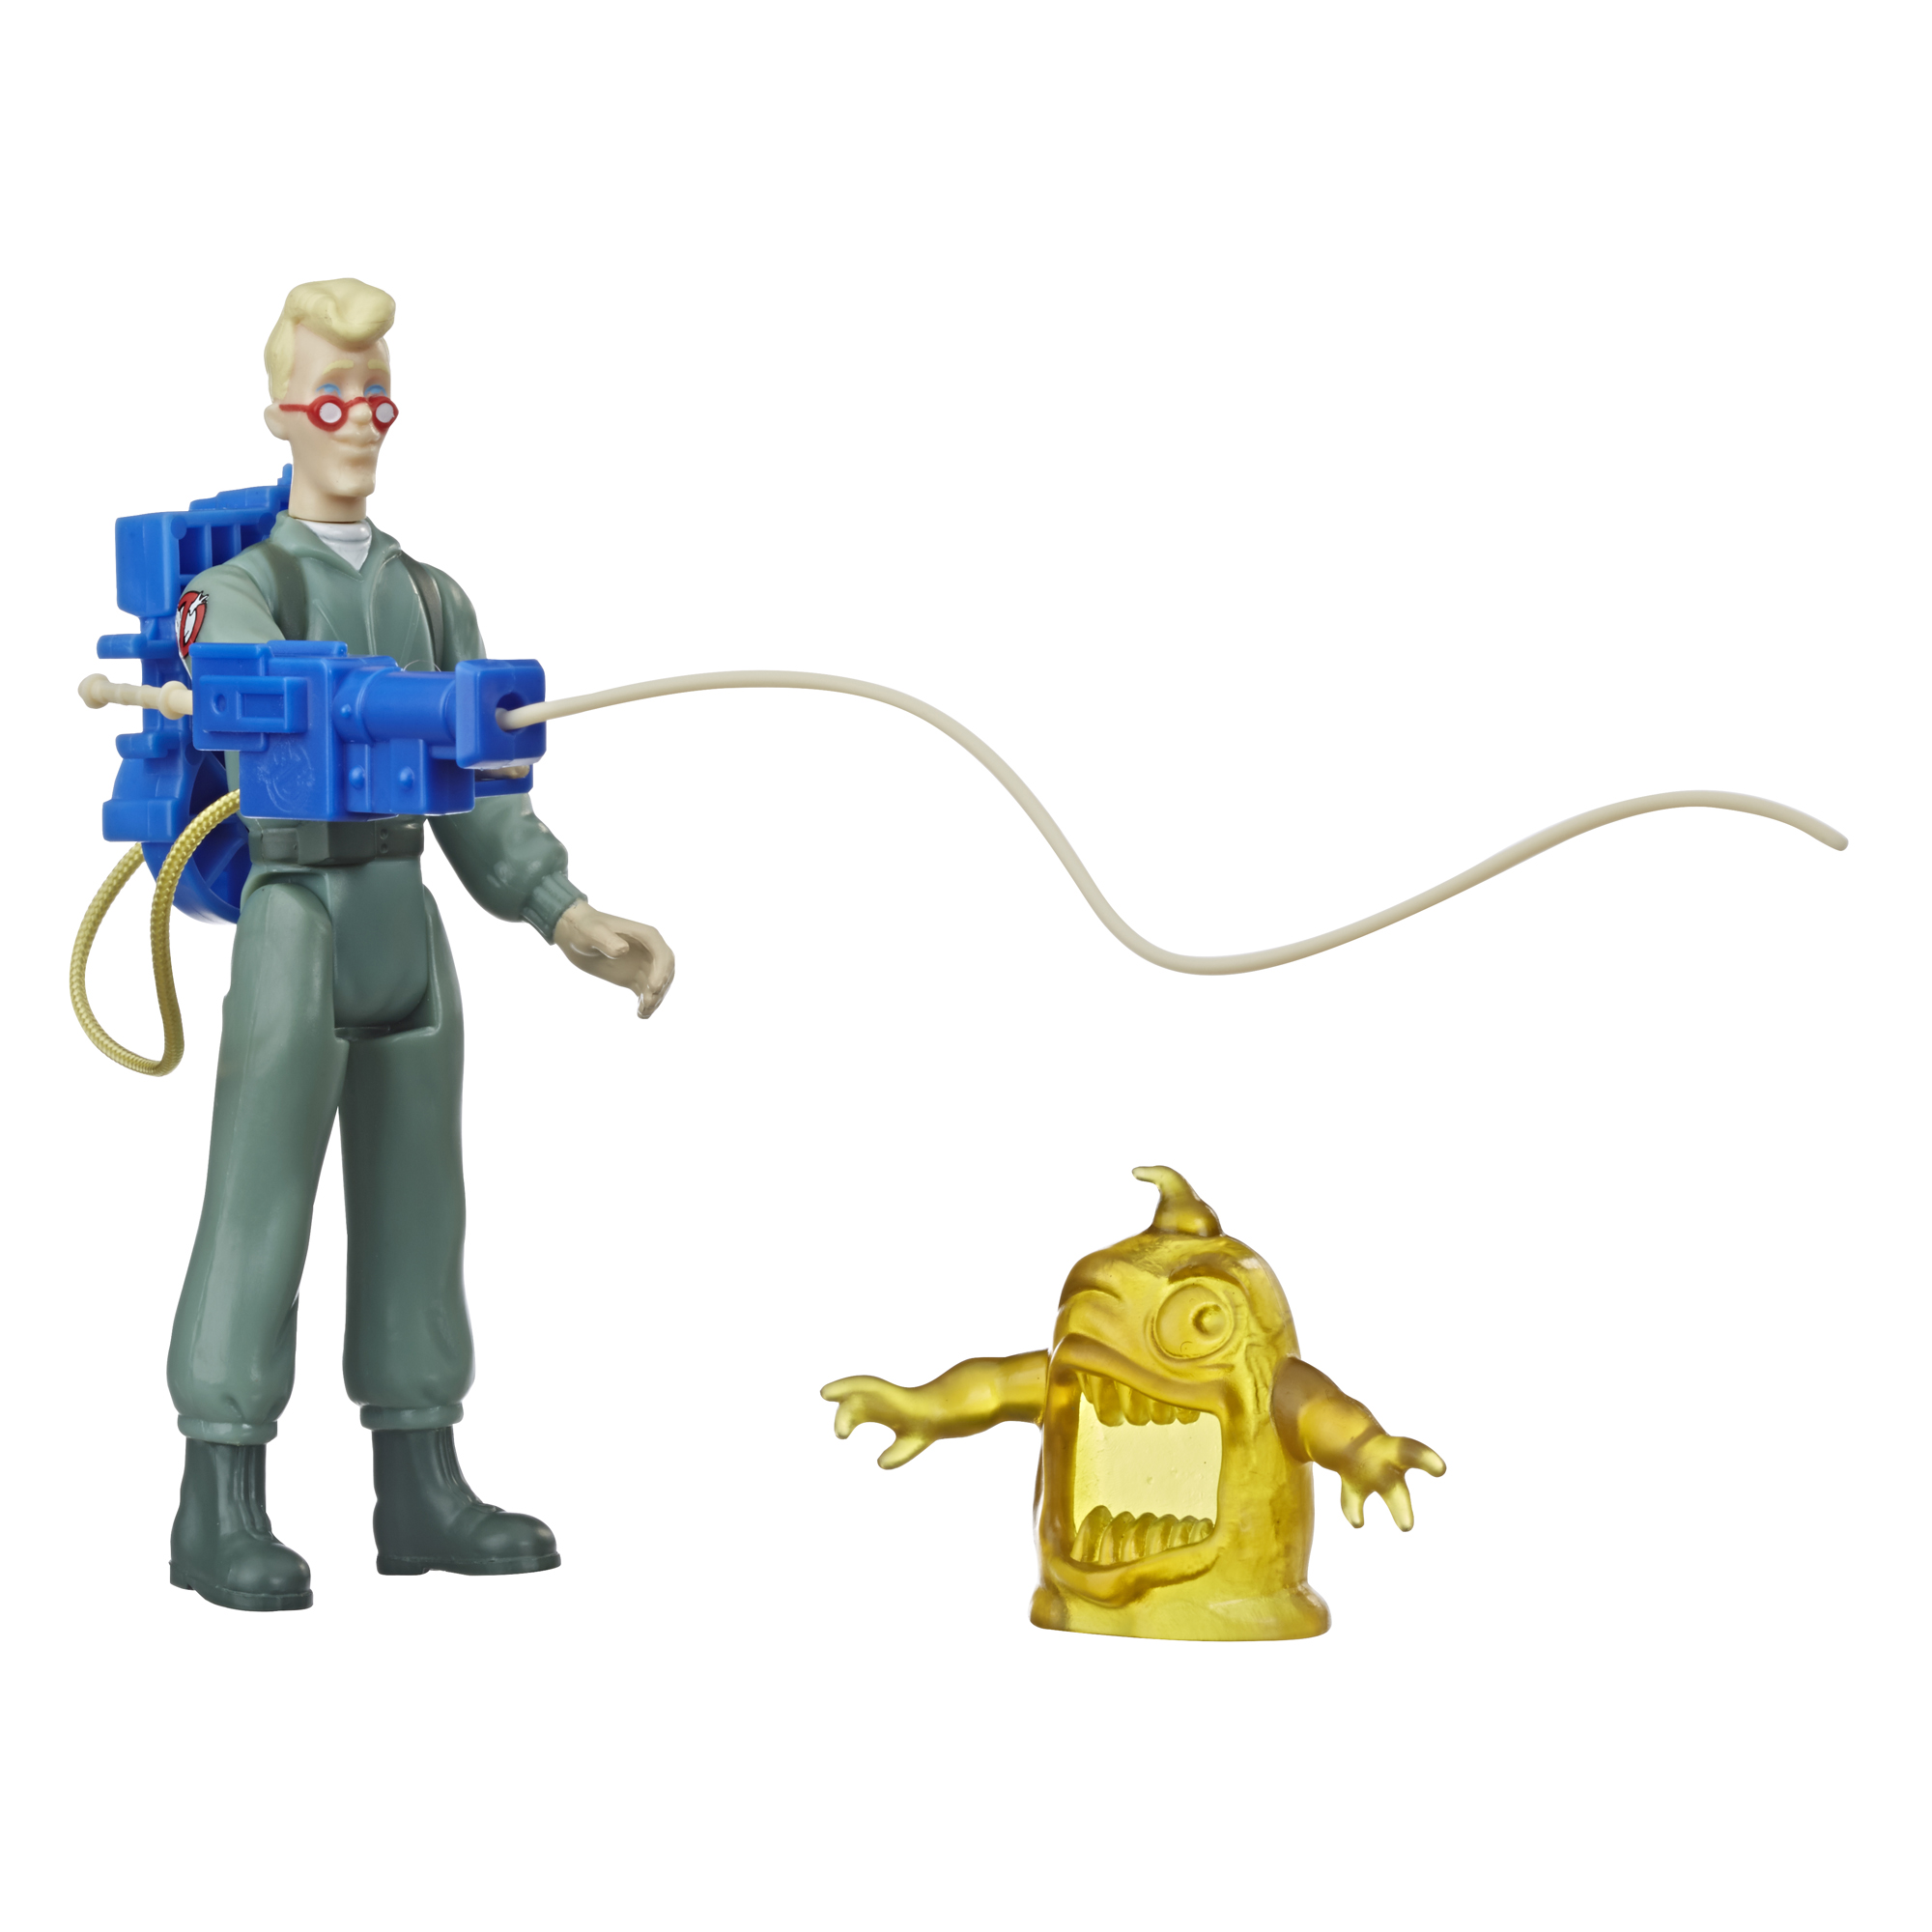 Ghostbusters Kenner Classics Egon Spengler and Gulper Ghost Action Figure - image 1 of 6